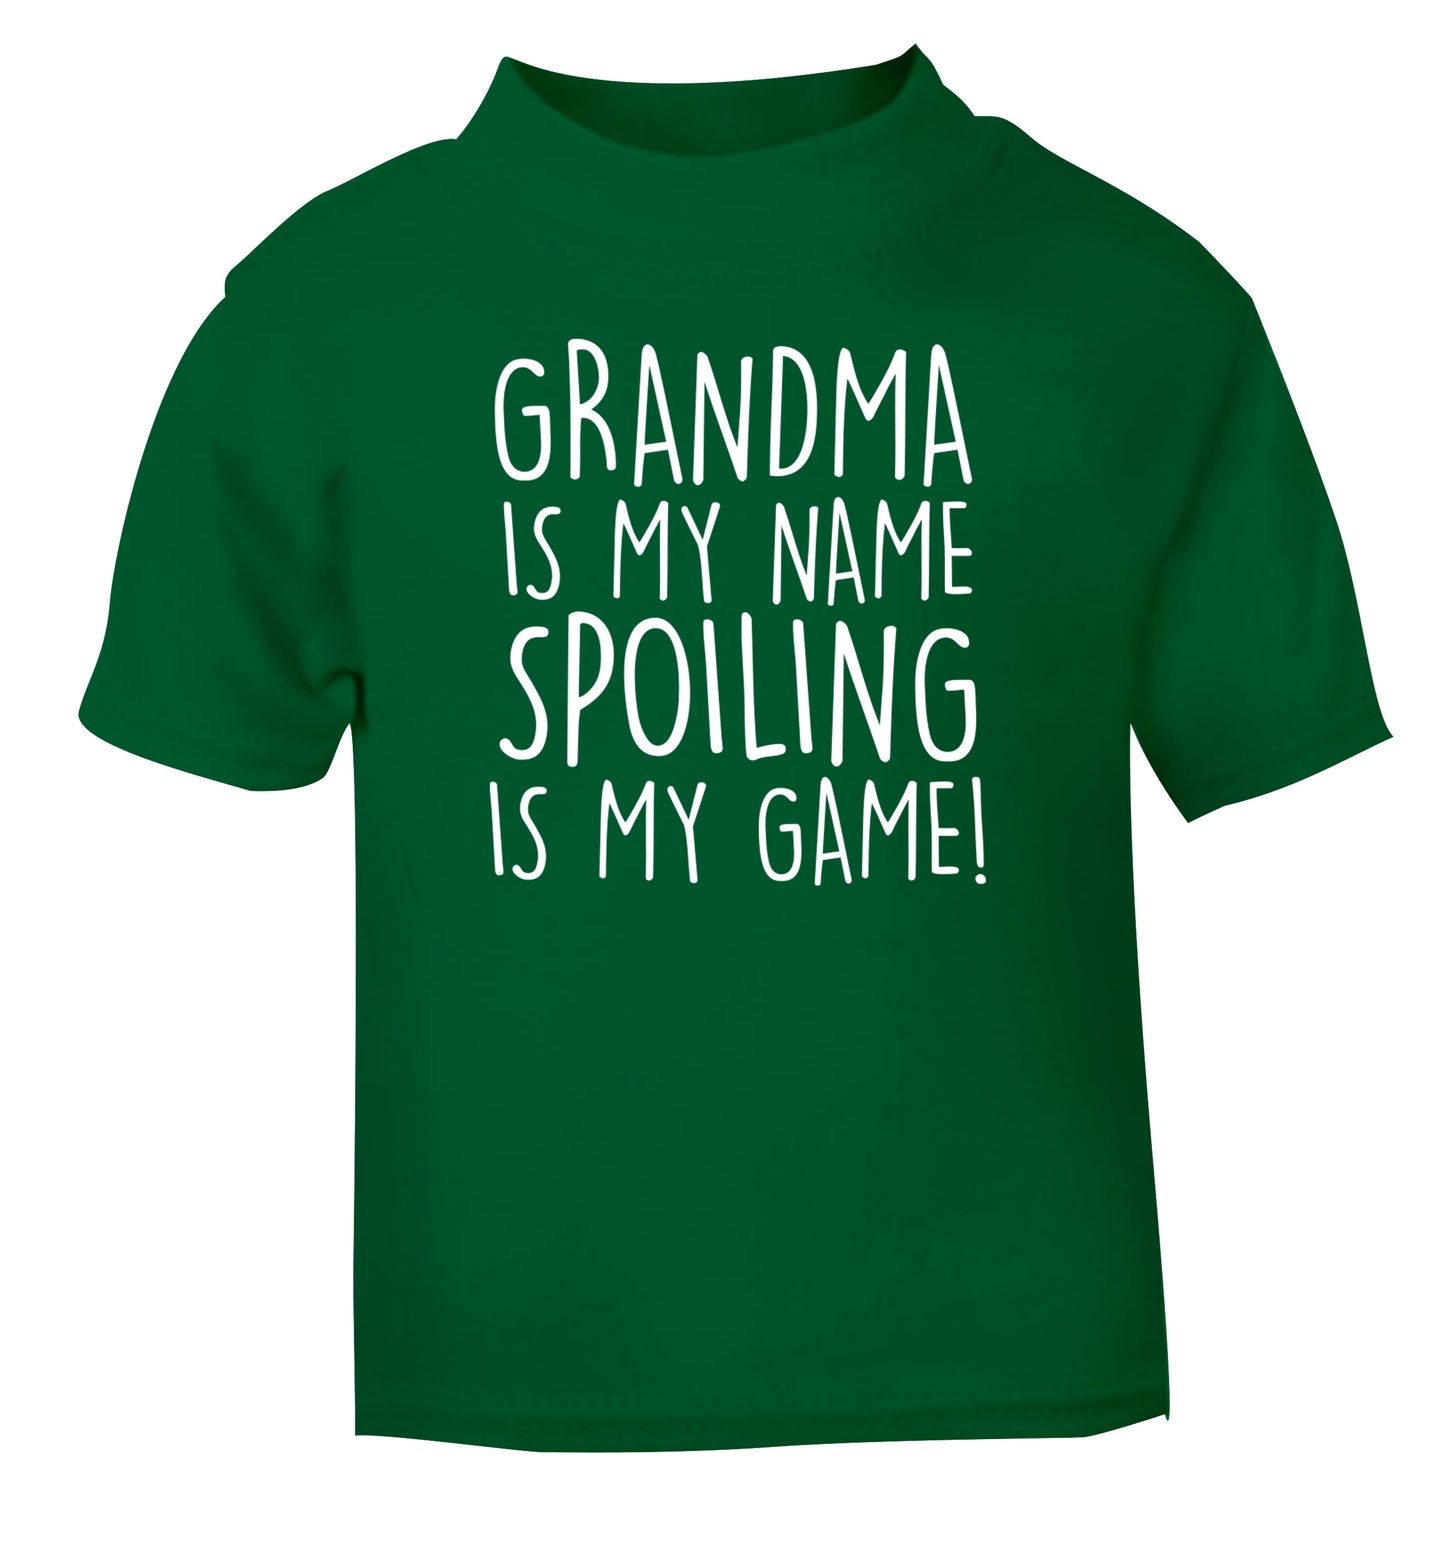 Grandma is my name, spoiling is my game green Baby Toddler Tshirt 2 Years